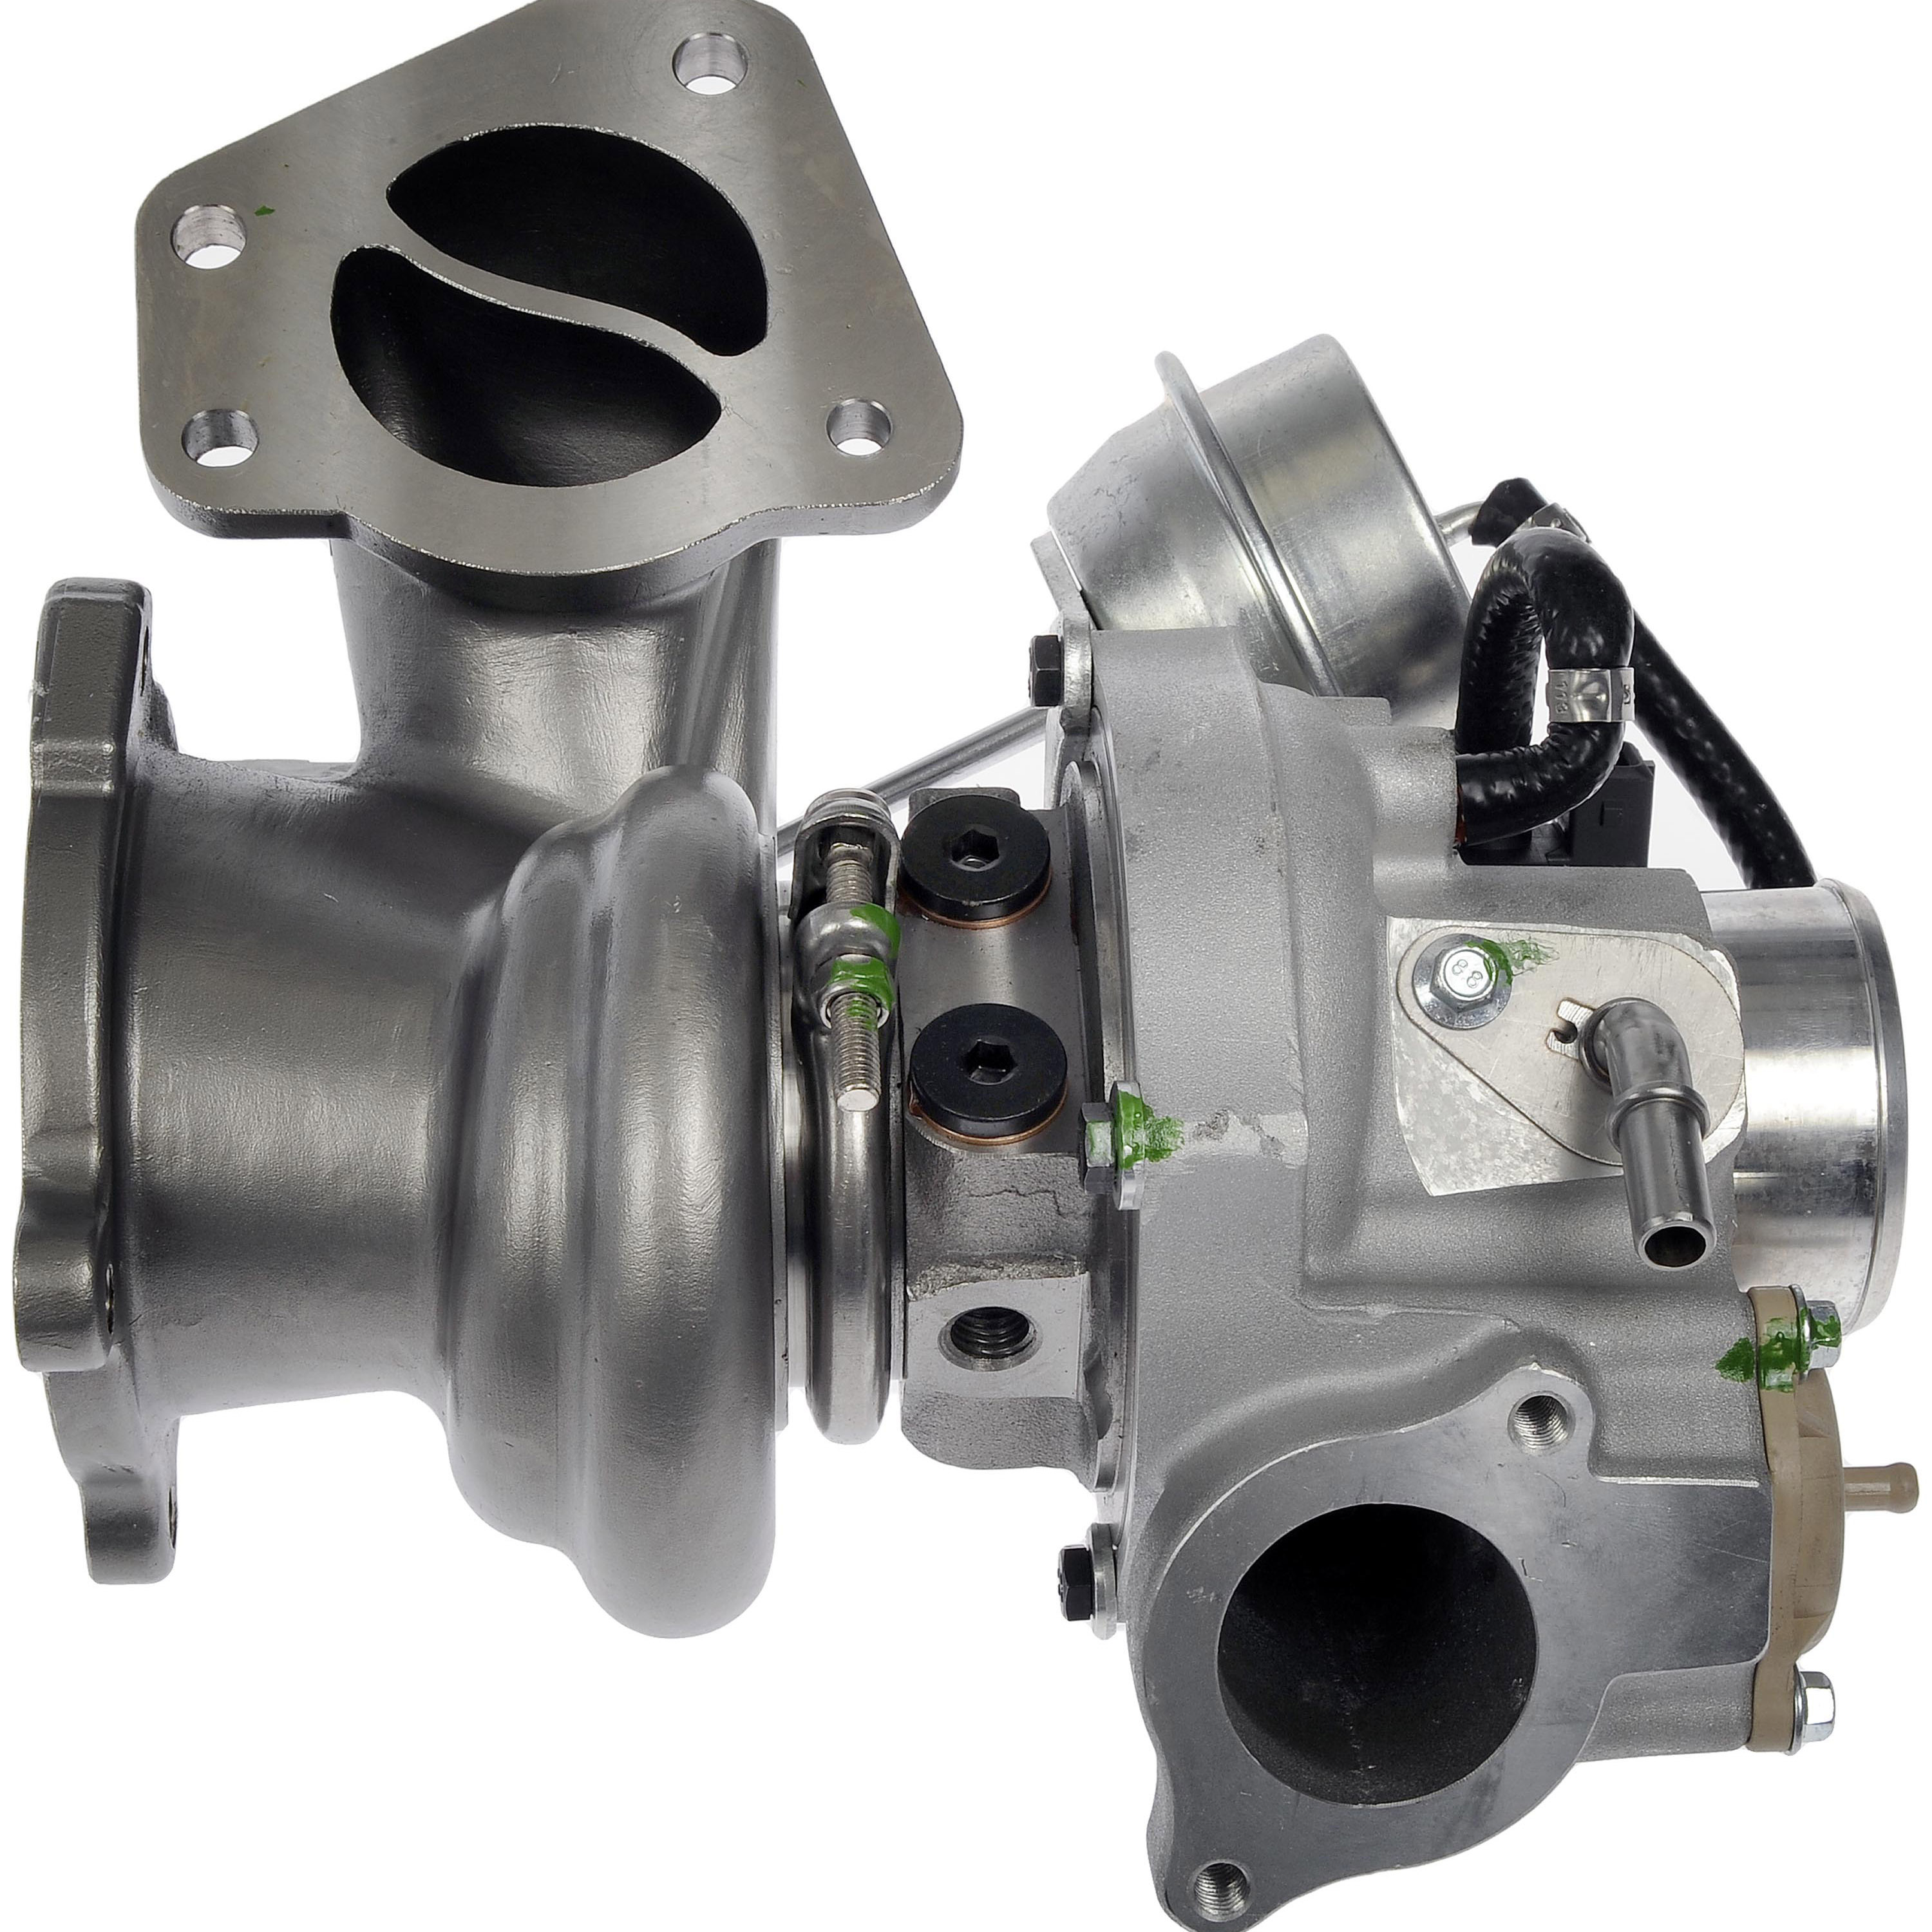 Dorman 917-153 Turbocharger for Specific Models Fits select: 2011-2013  BUICK REGAL, 2007-2010 SATURN SKY